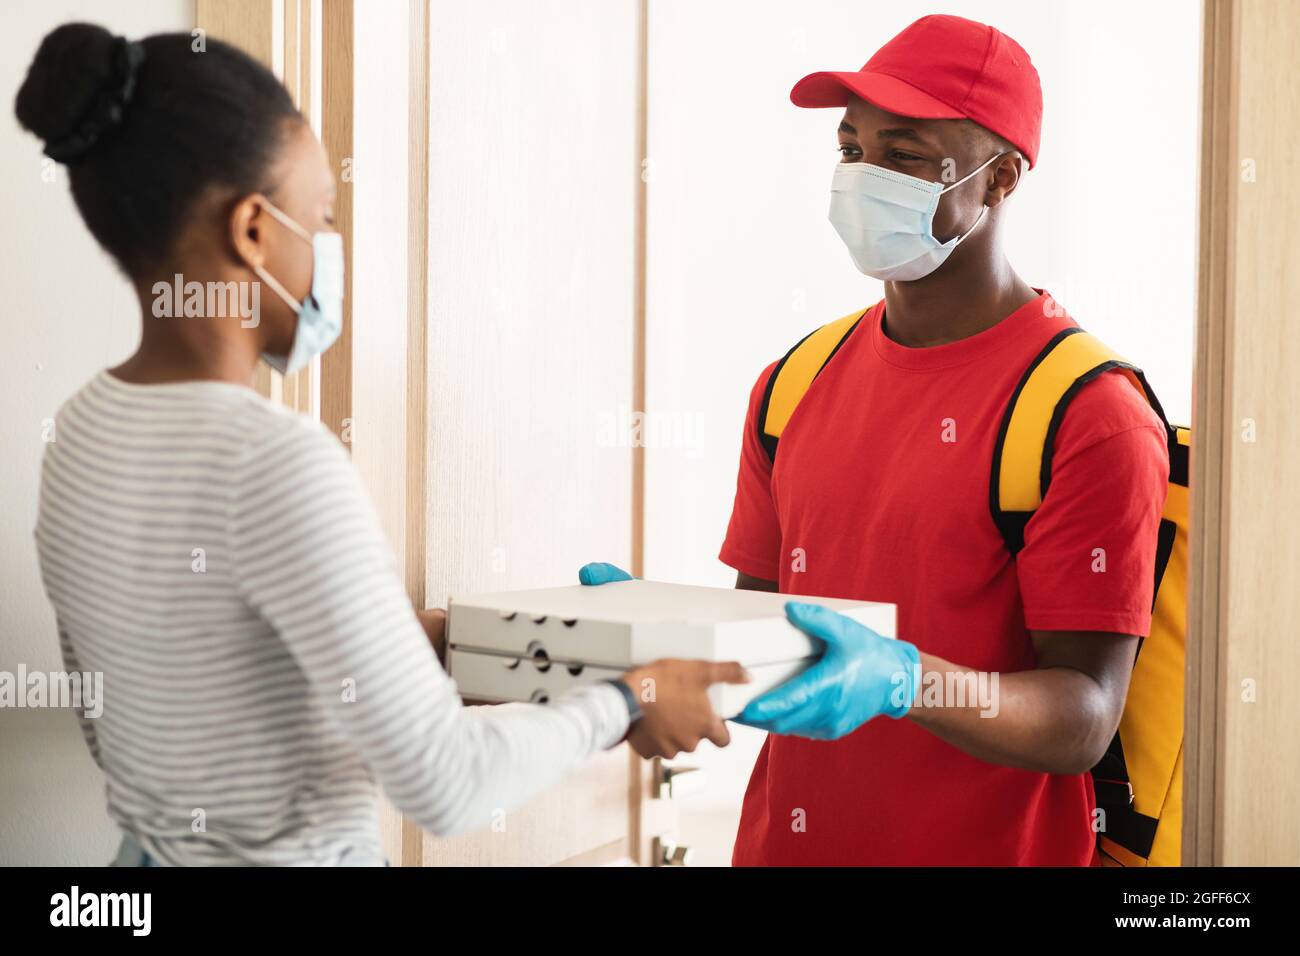 Black Woman Receiving Order Taking Pizza Boxes From Deliveryman Indoor Stock Photo